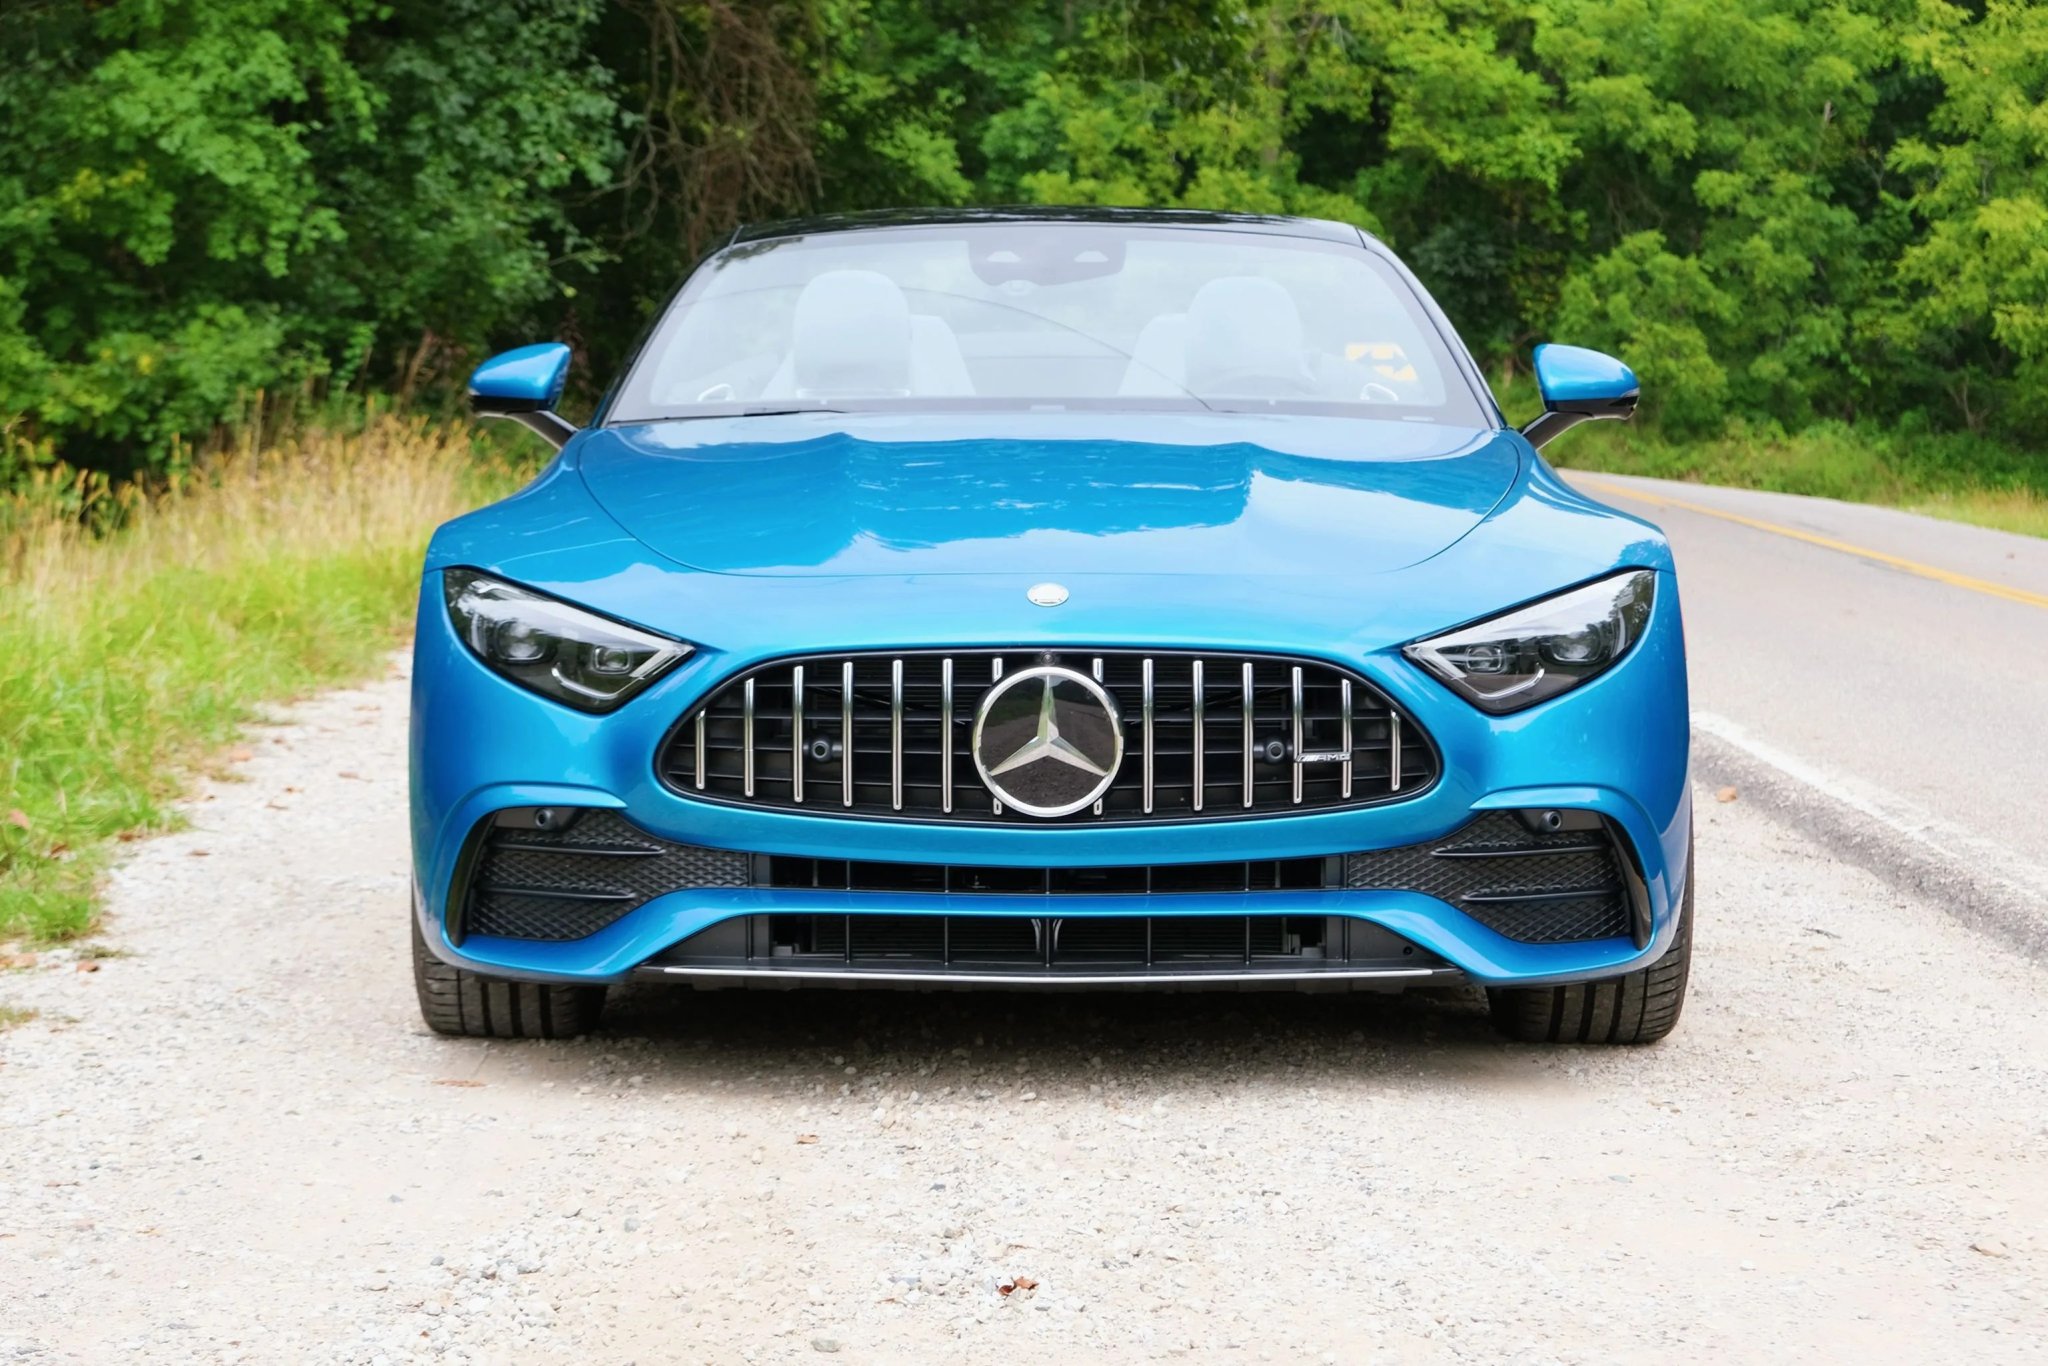 2023 Mercedes-AMG SL 43 Review: Looks Great, But Where’s the V8?